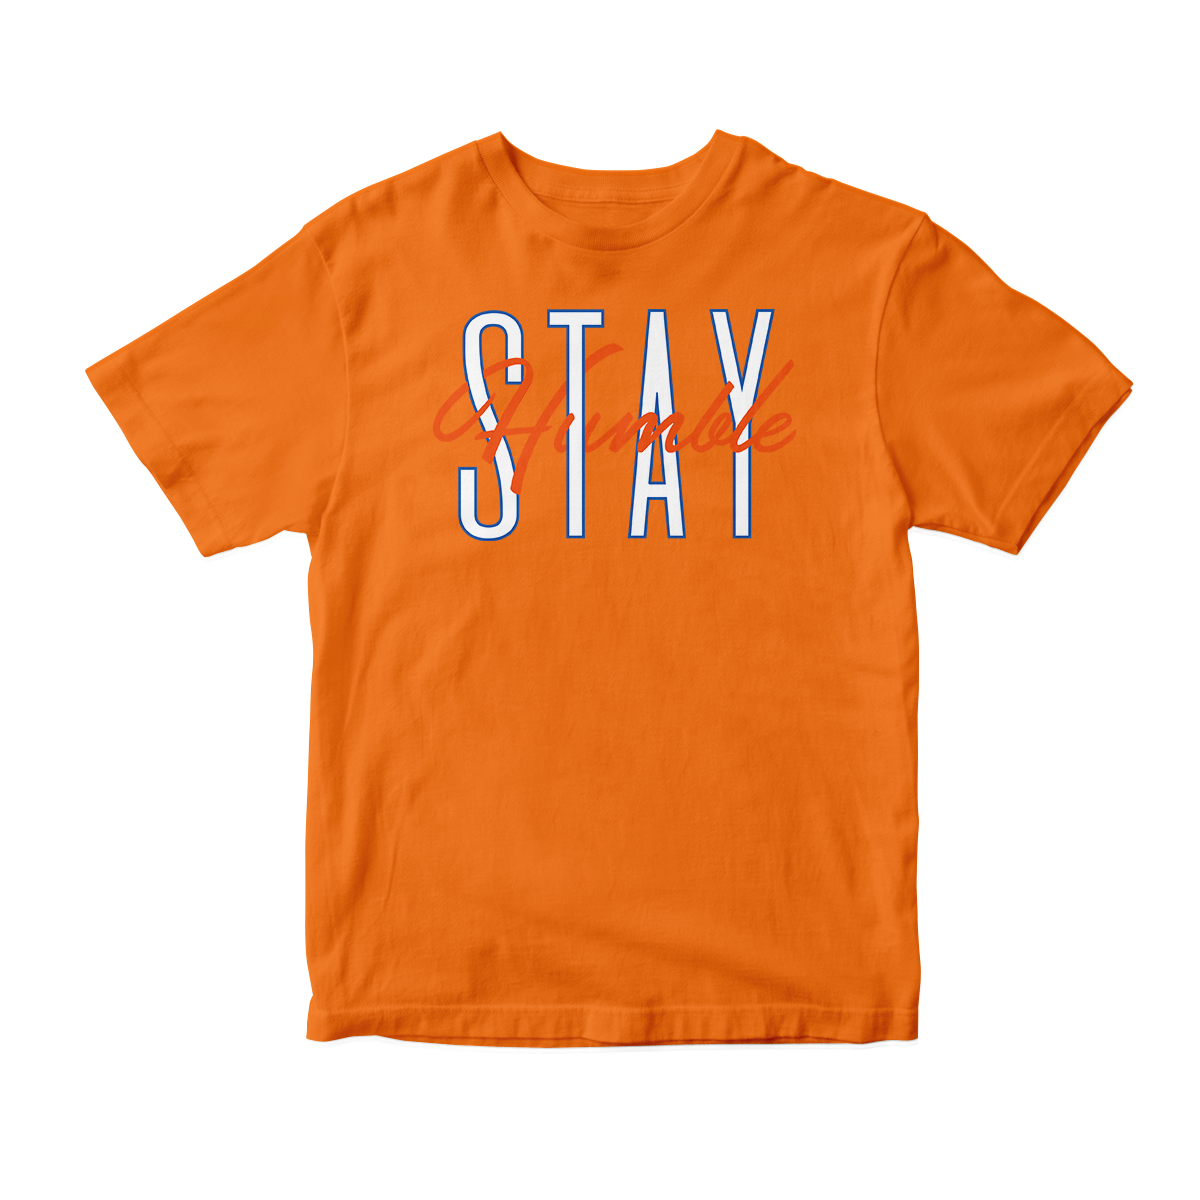 'Stay Humble' in Knicks CW Unisex Short Sleeve Tee